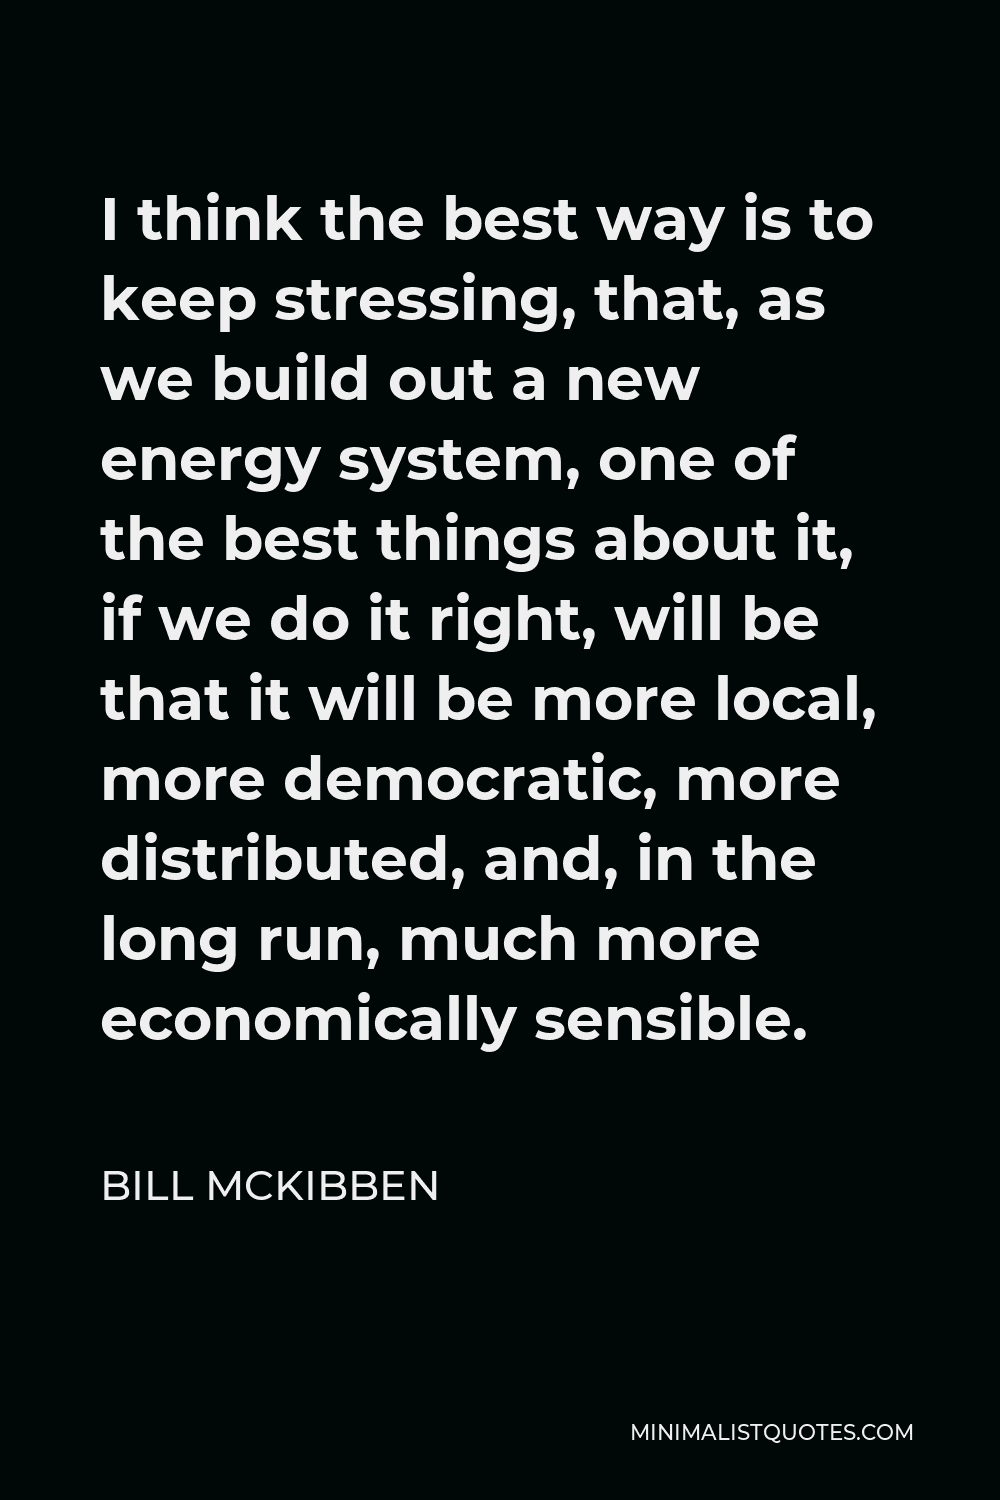 Bill McKibben Quote - I think the best way is to keep stressing, that, as we build out a new energy system, one of the best things about it, if we do it right, will be that it will be more local, more democratic, more distributed, and, in the long run, much more economically sensible.